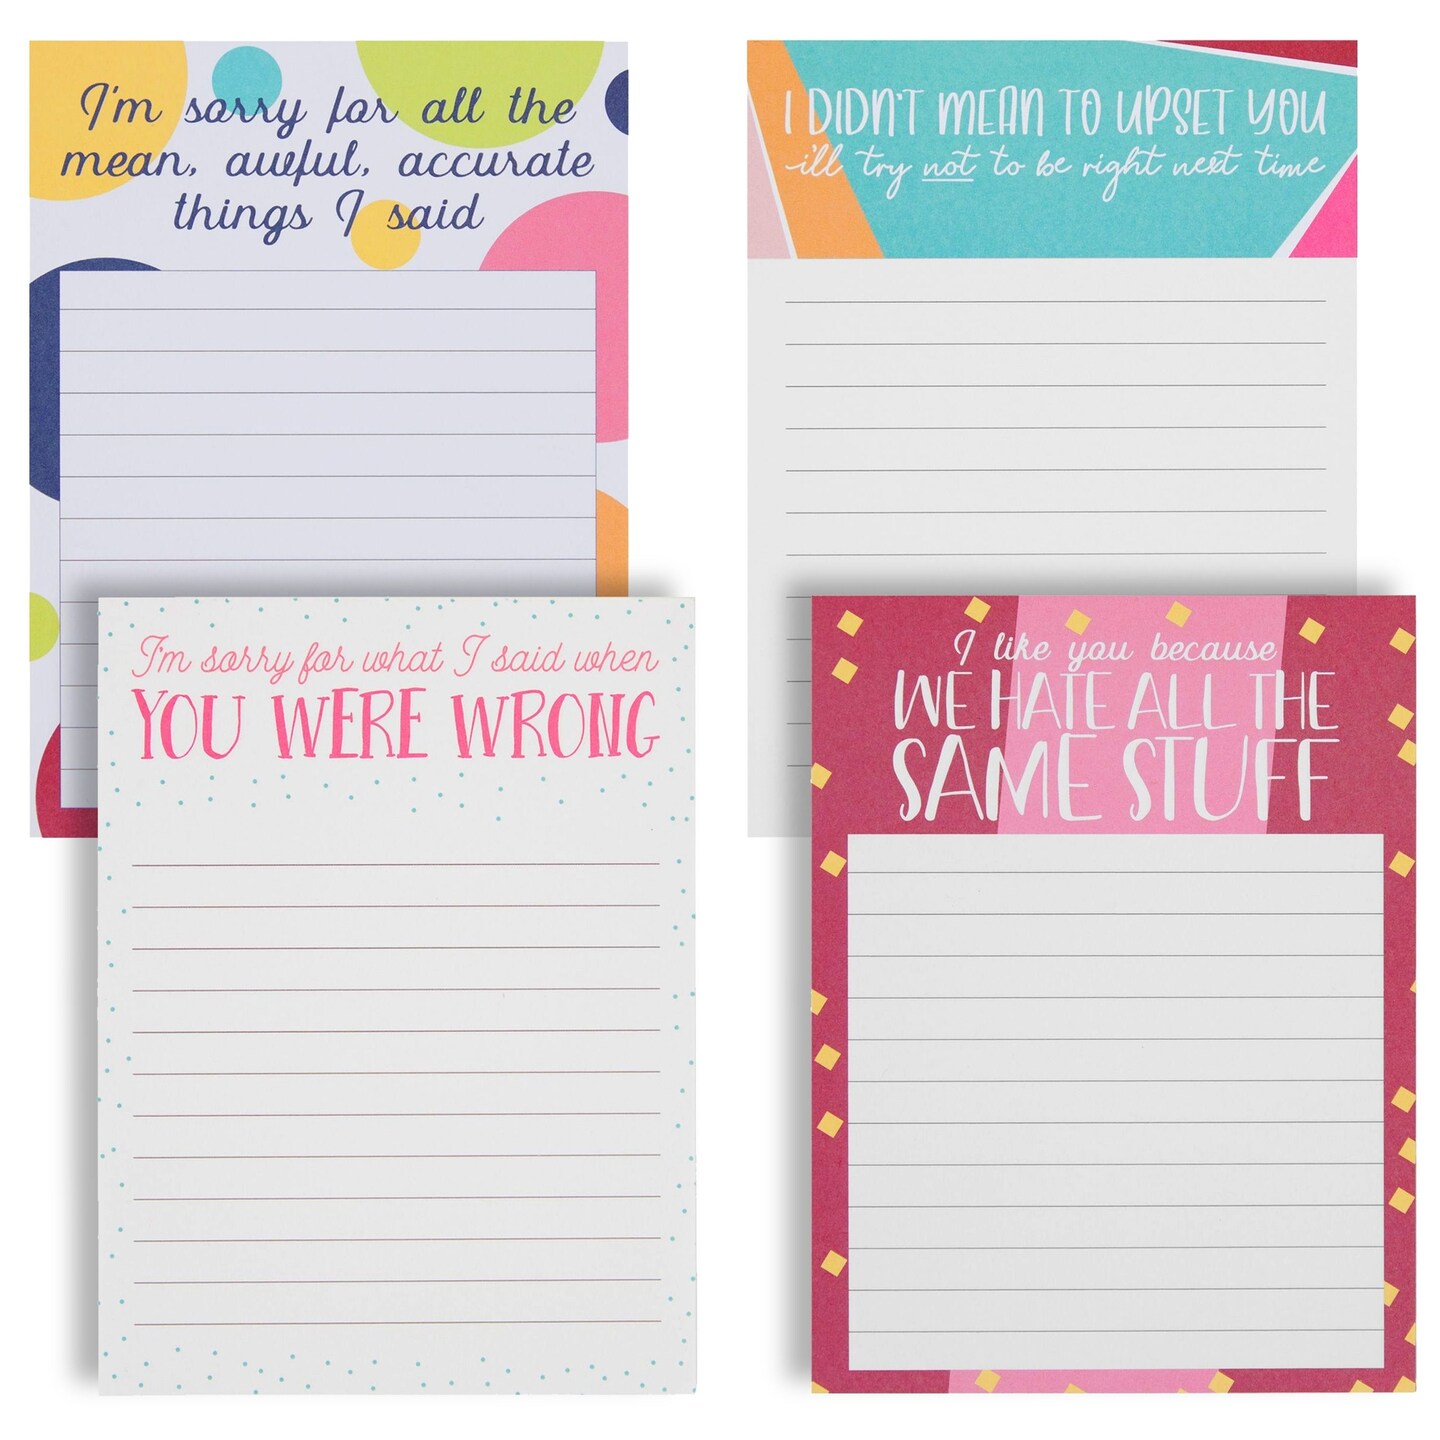  Ireer 24 Pcs Funny Spiral Notepads with Sayings Snarky Office  Pens Funny Work Mini Memo Note Pads Ballpoint Pens to Do List Funny Office  Supplies for Workers (Sarcastic) : Office Products